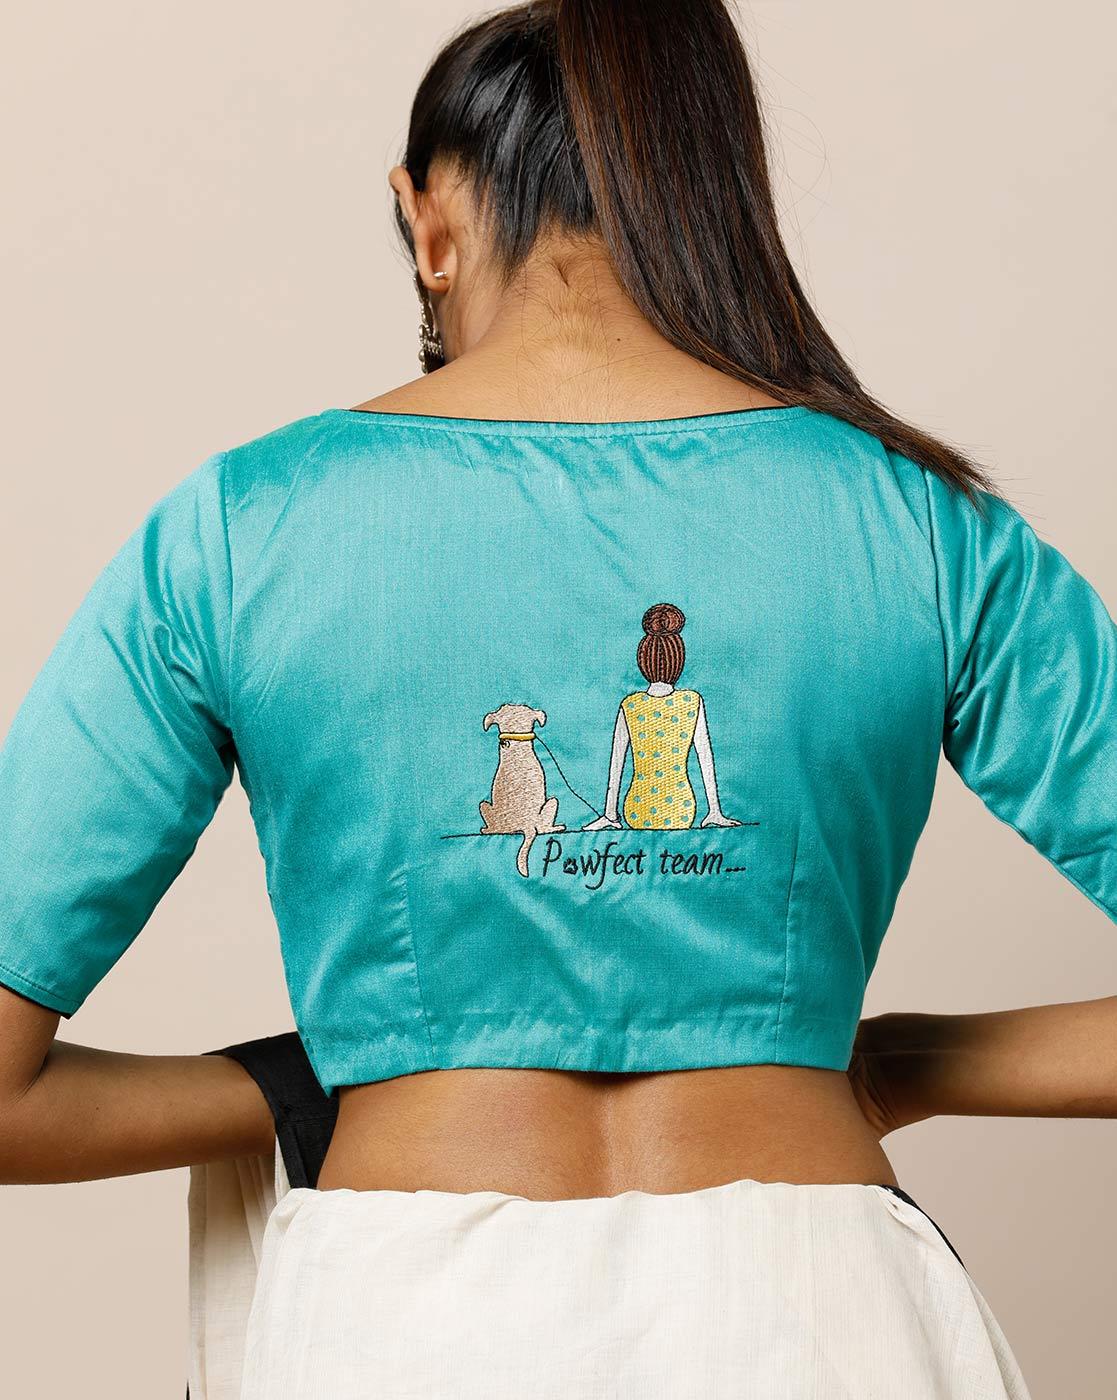 blouse-back-with-embroidery-designs-2019 (15)